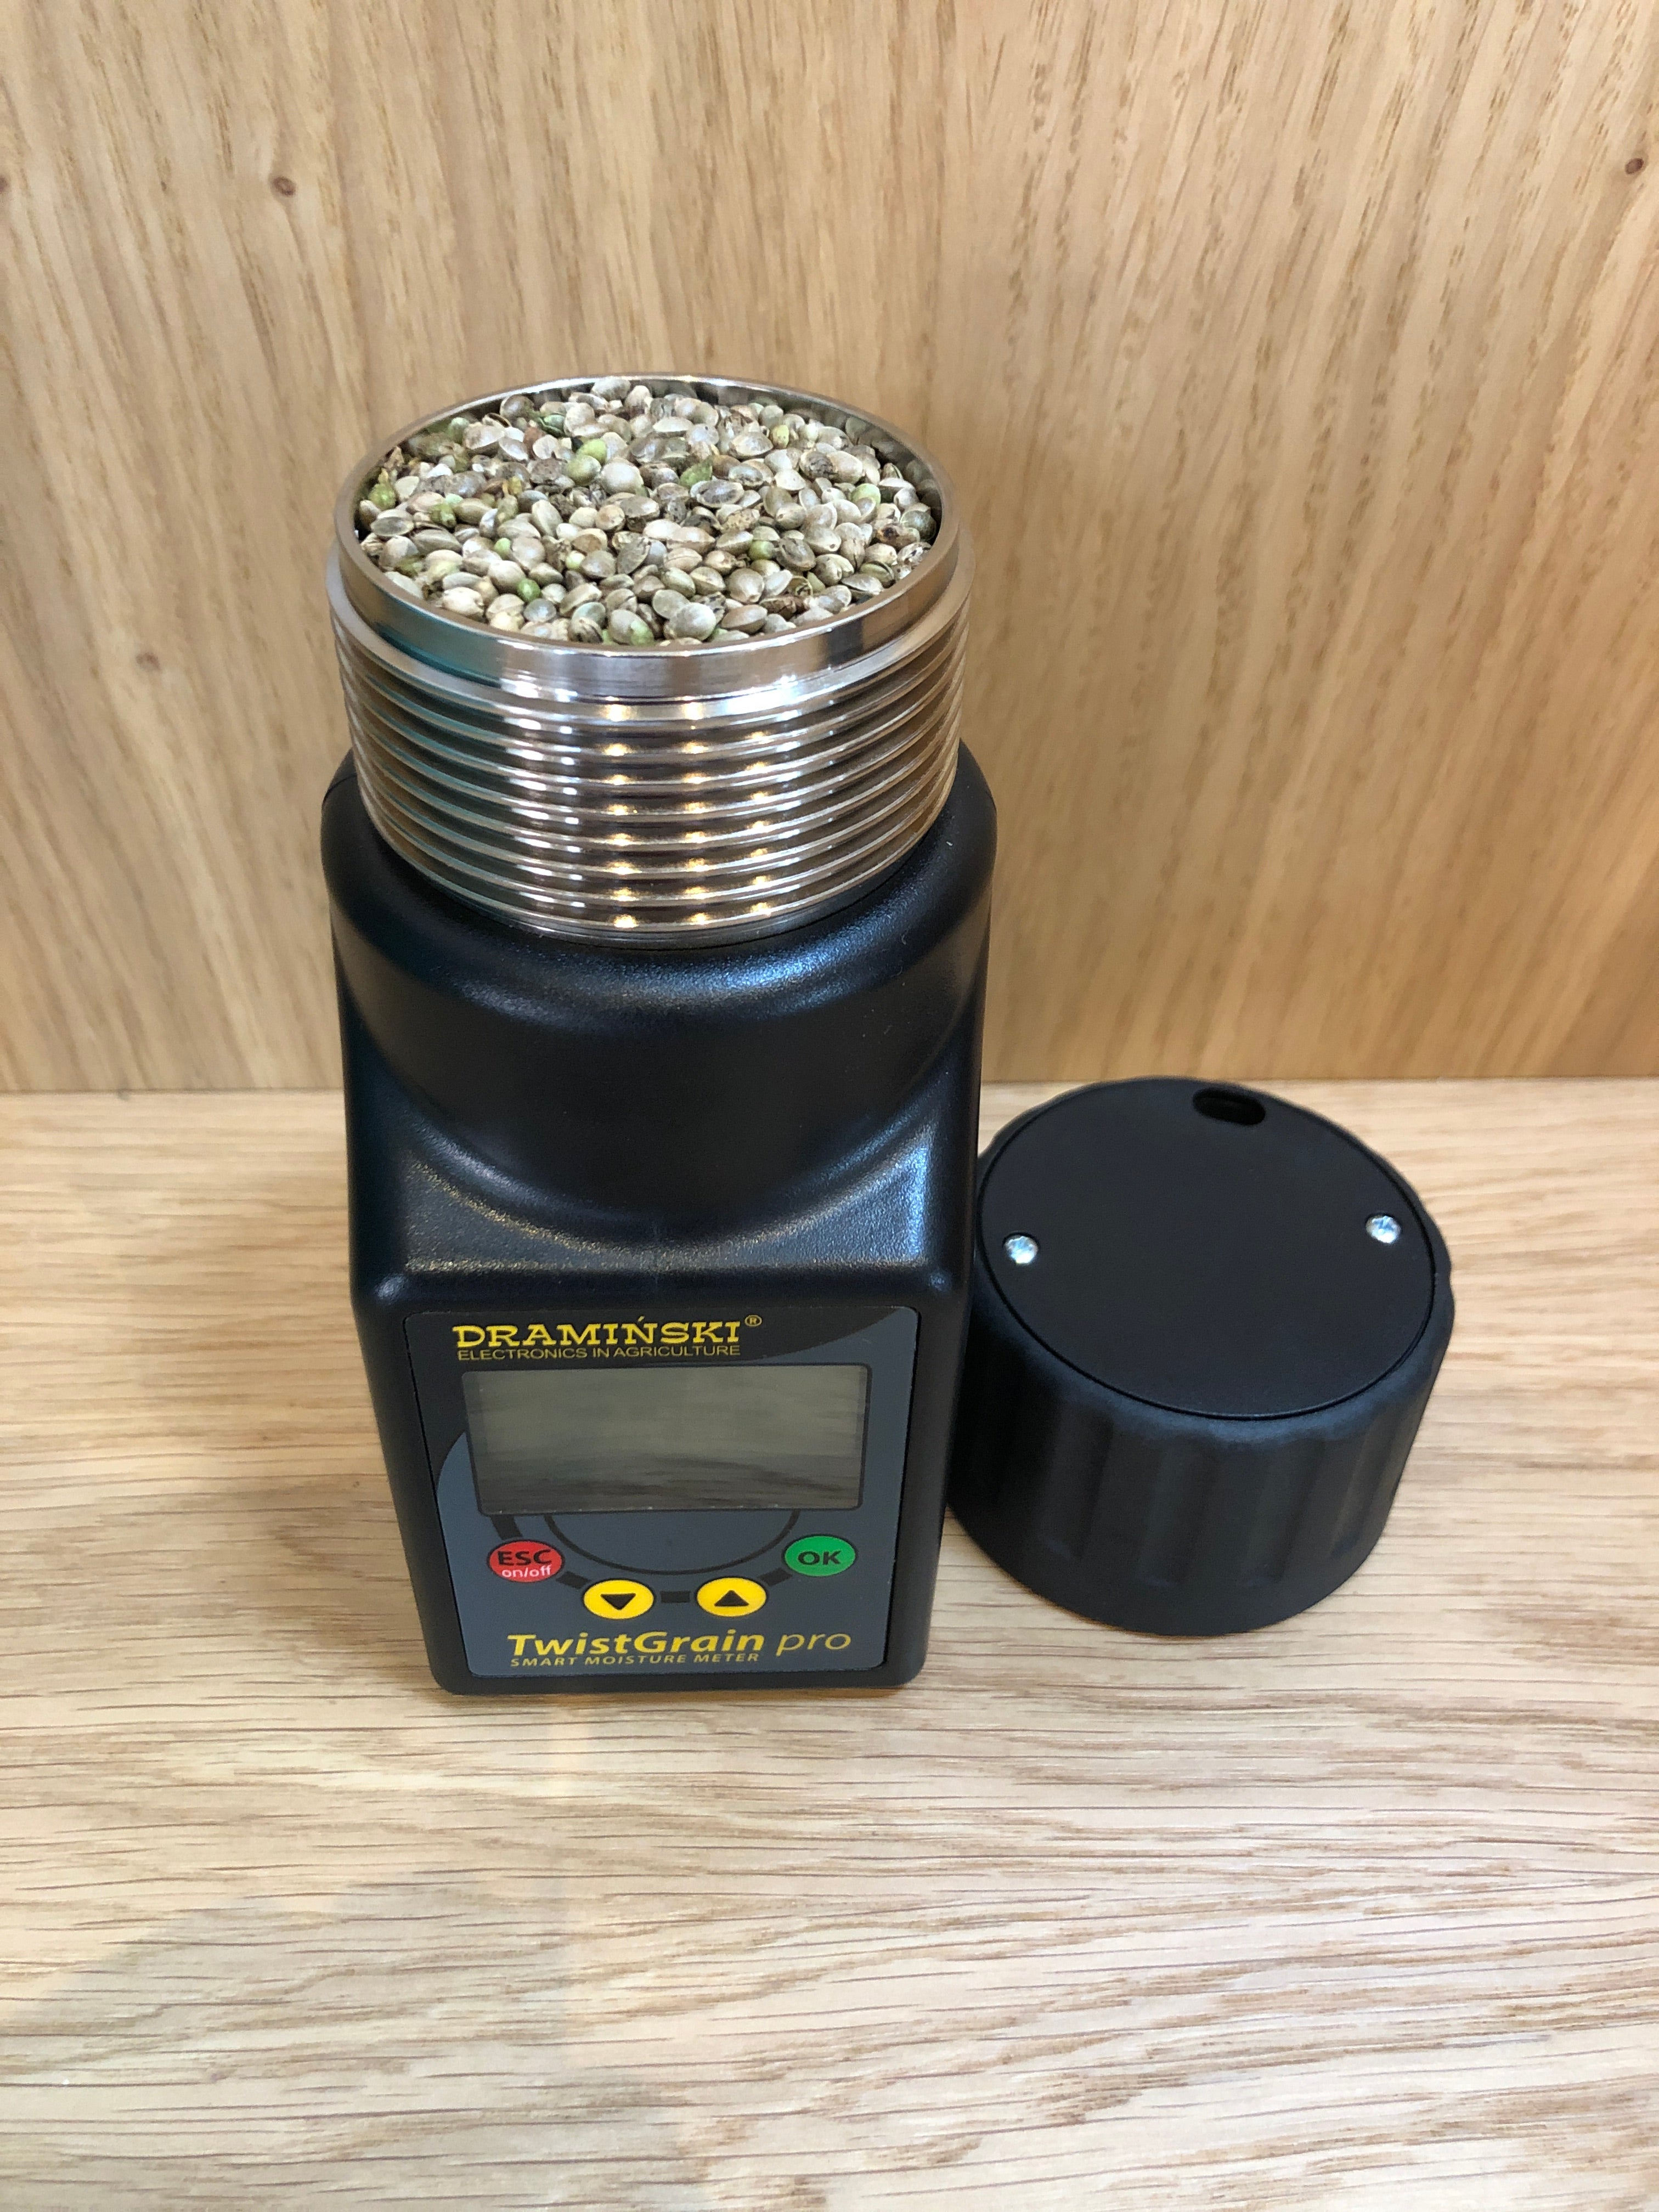 Close up of the DRAMINSKI moisture meter with hemp seed in the hopper